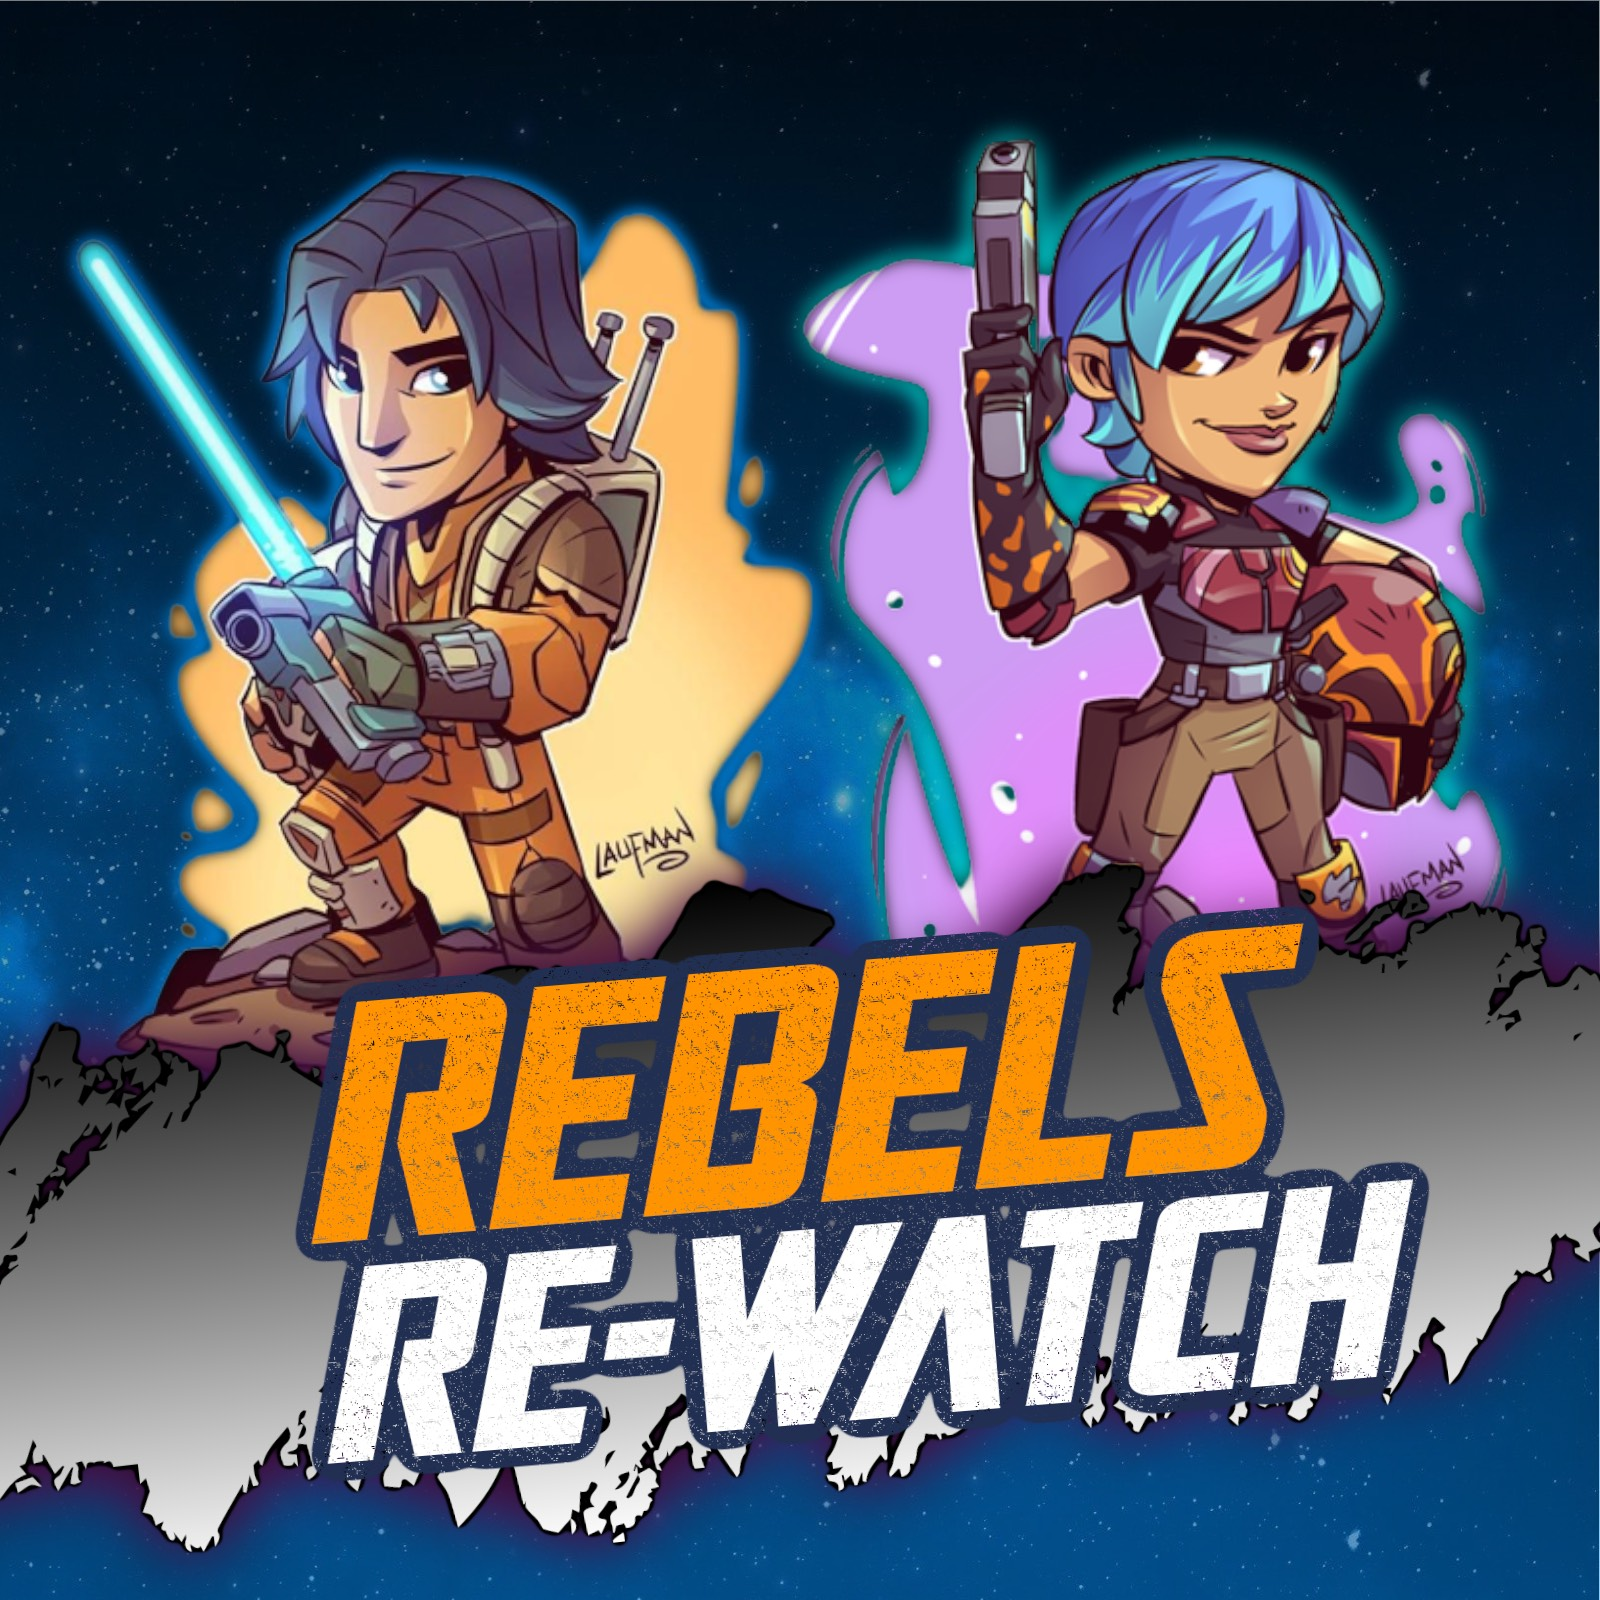 Star Wars: Rebels Rewatch - S2E2 | The Siege of Lothal PART 2